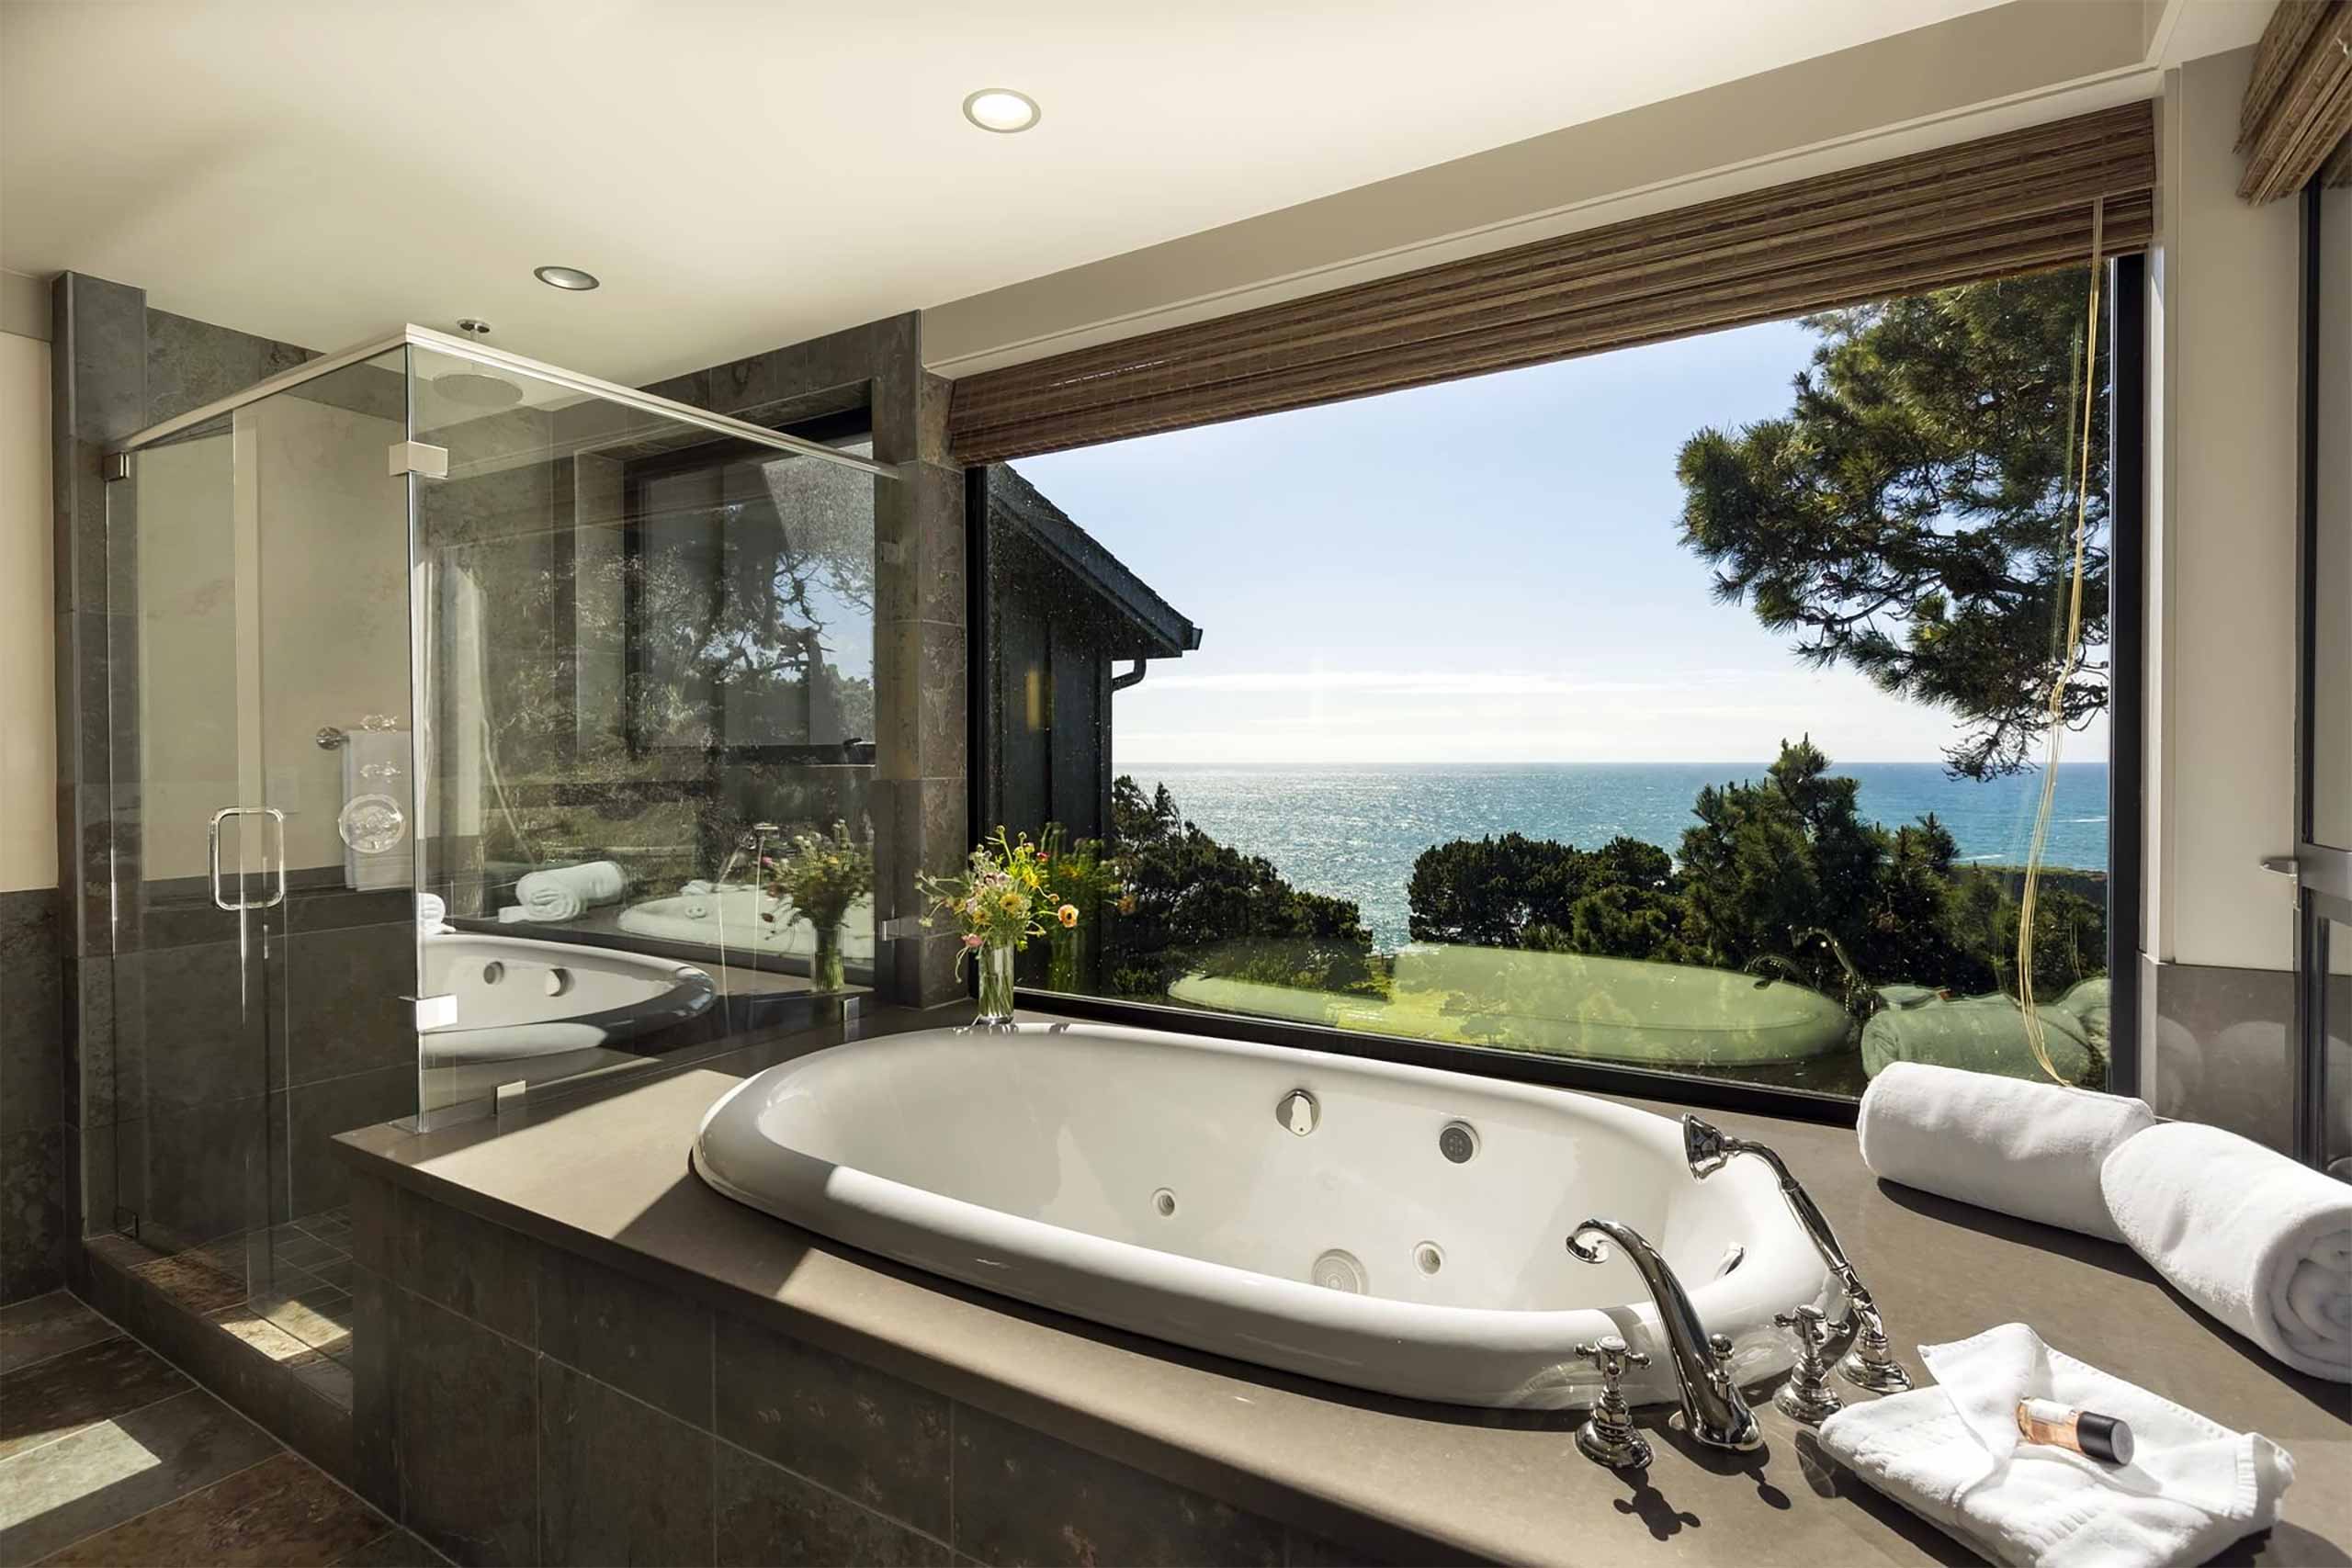 Bathtub with a view at Heritage House Resort & Spa, Mendocino, California, USA